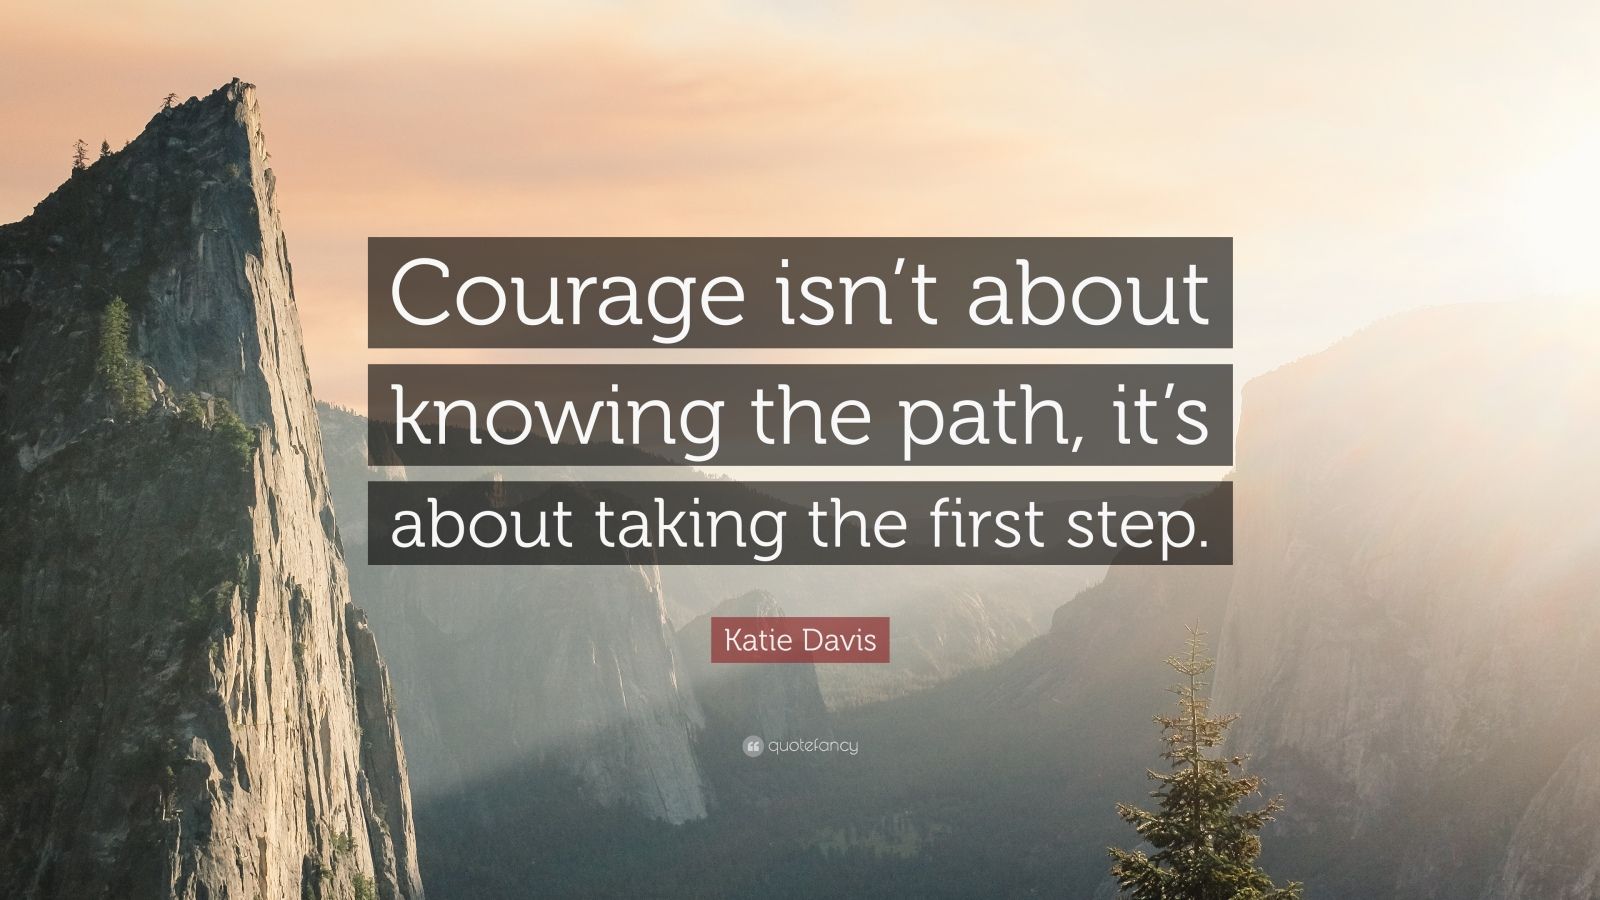 Katie Davis Quote: “Courage isn’t about knowing the path, it’s about